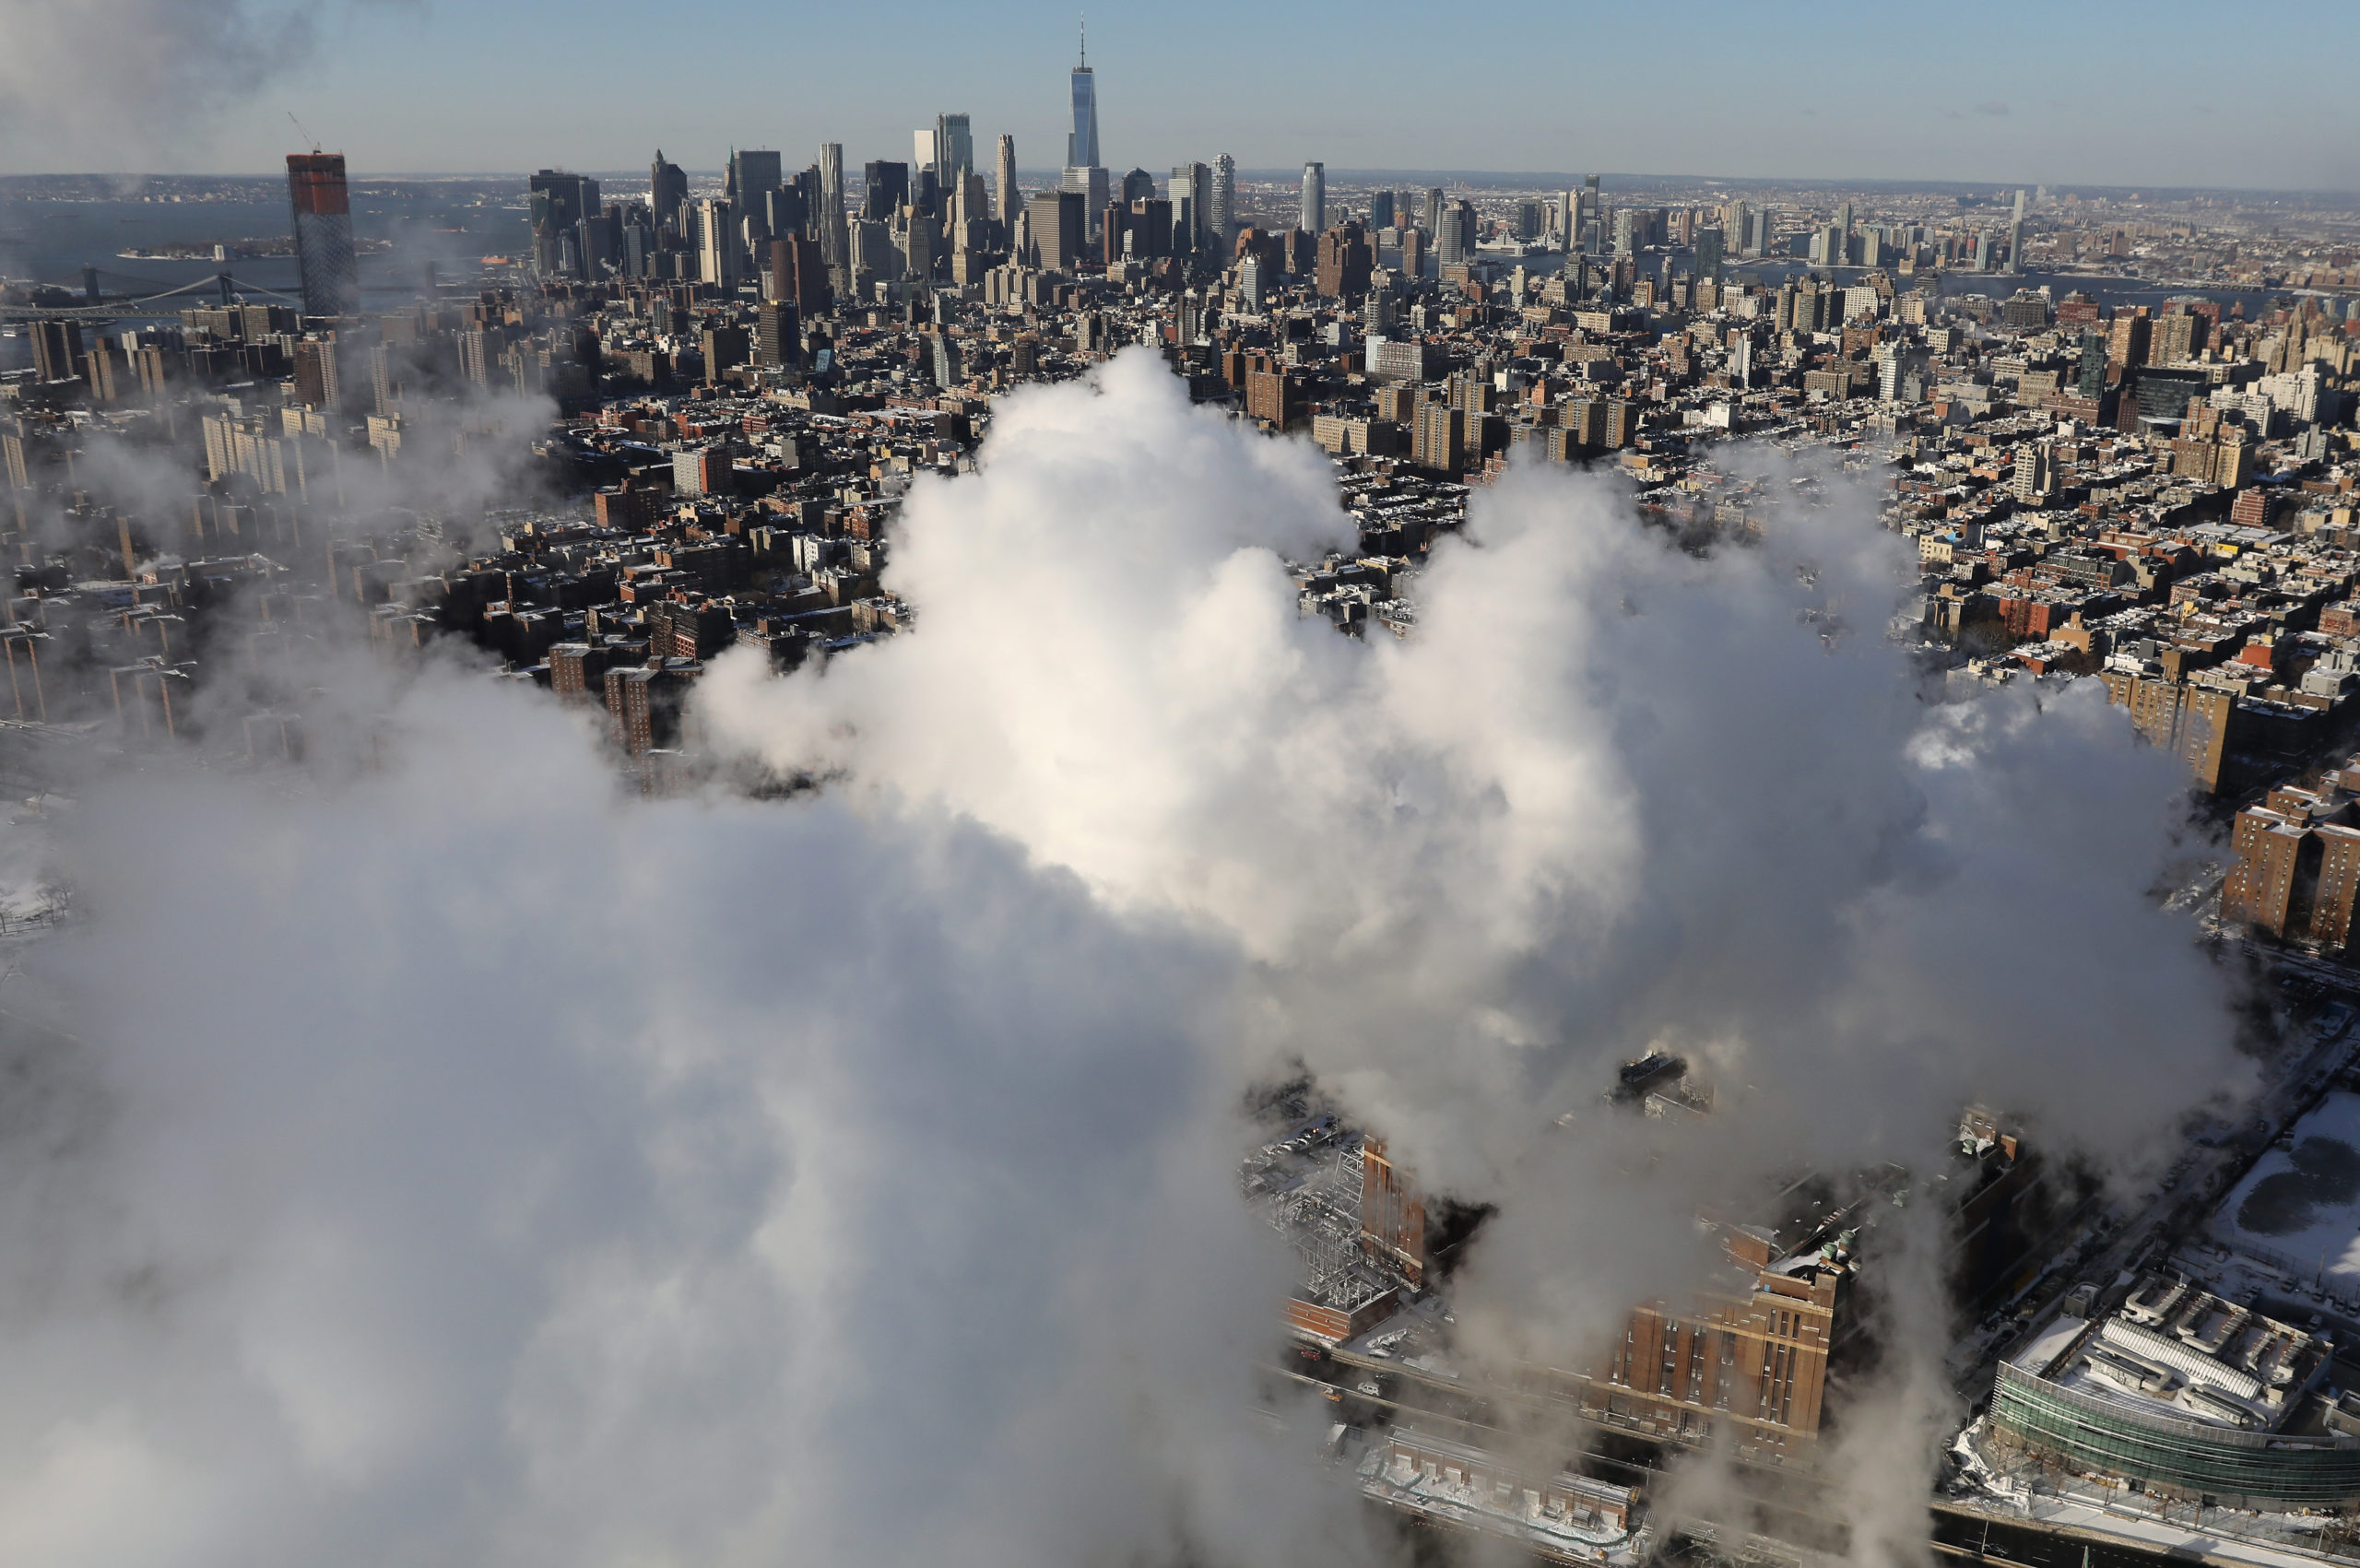 Steam rises from a power plant in 2018 in New York City. (John Moore/Getty Images)